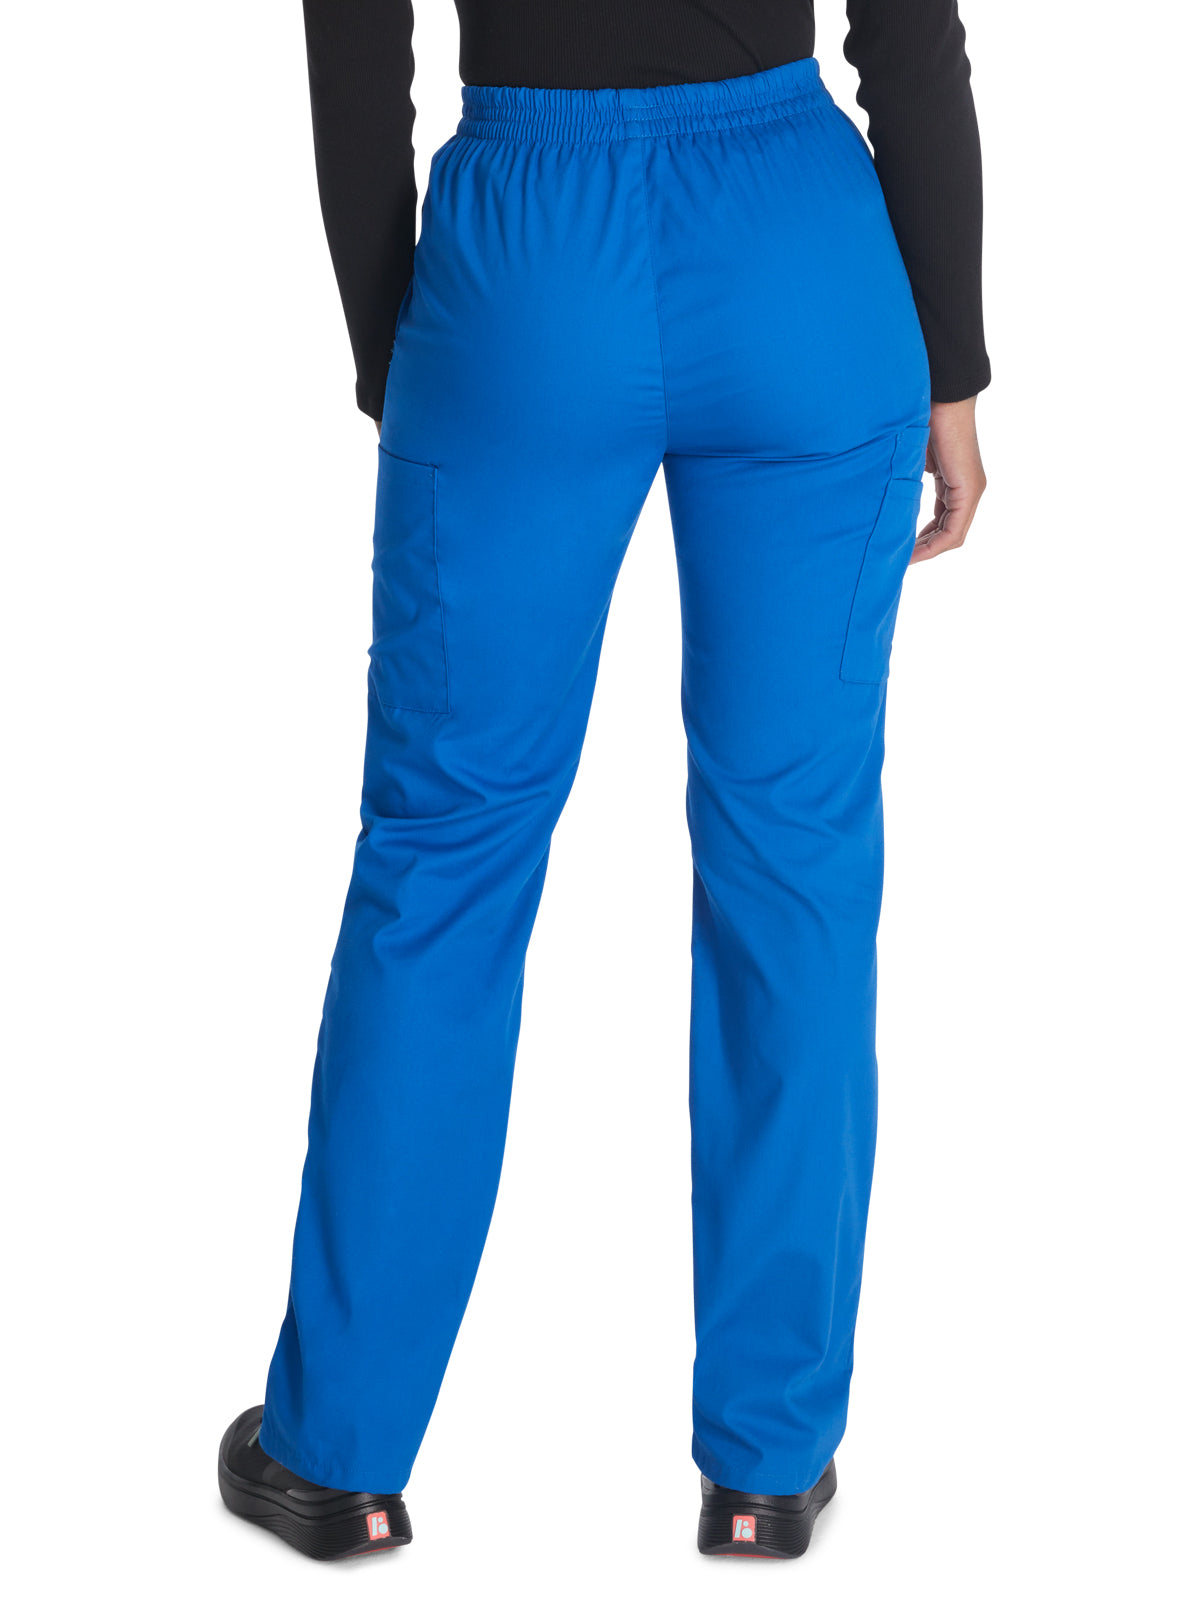 Women's Natural Rise Tapered Leg Pull-On Pant - 86106 - Royal